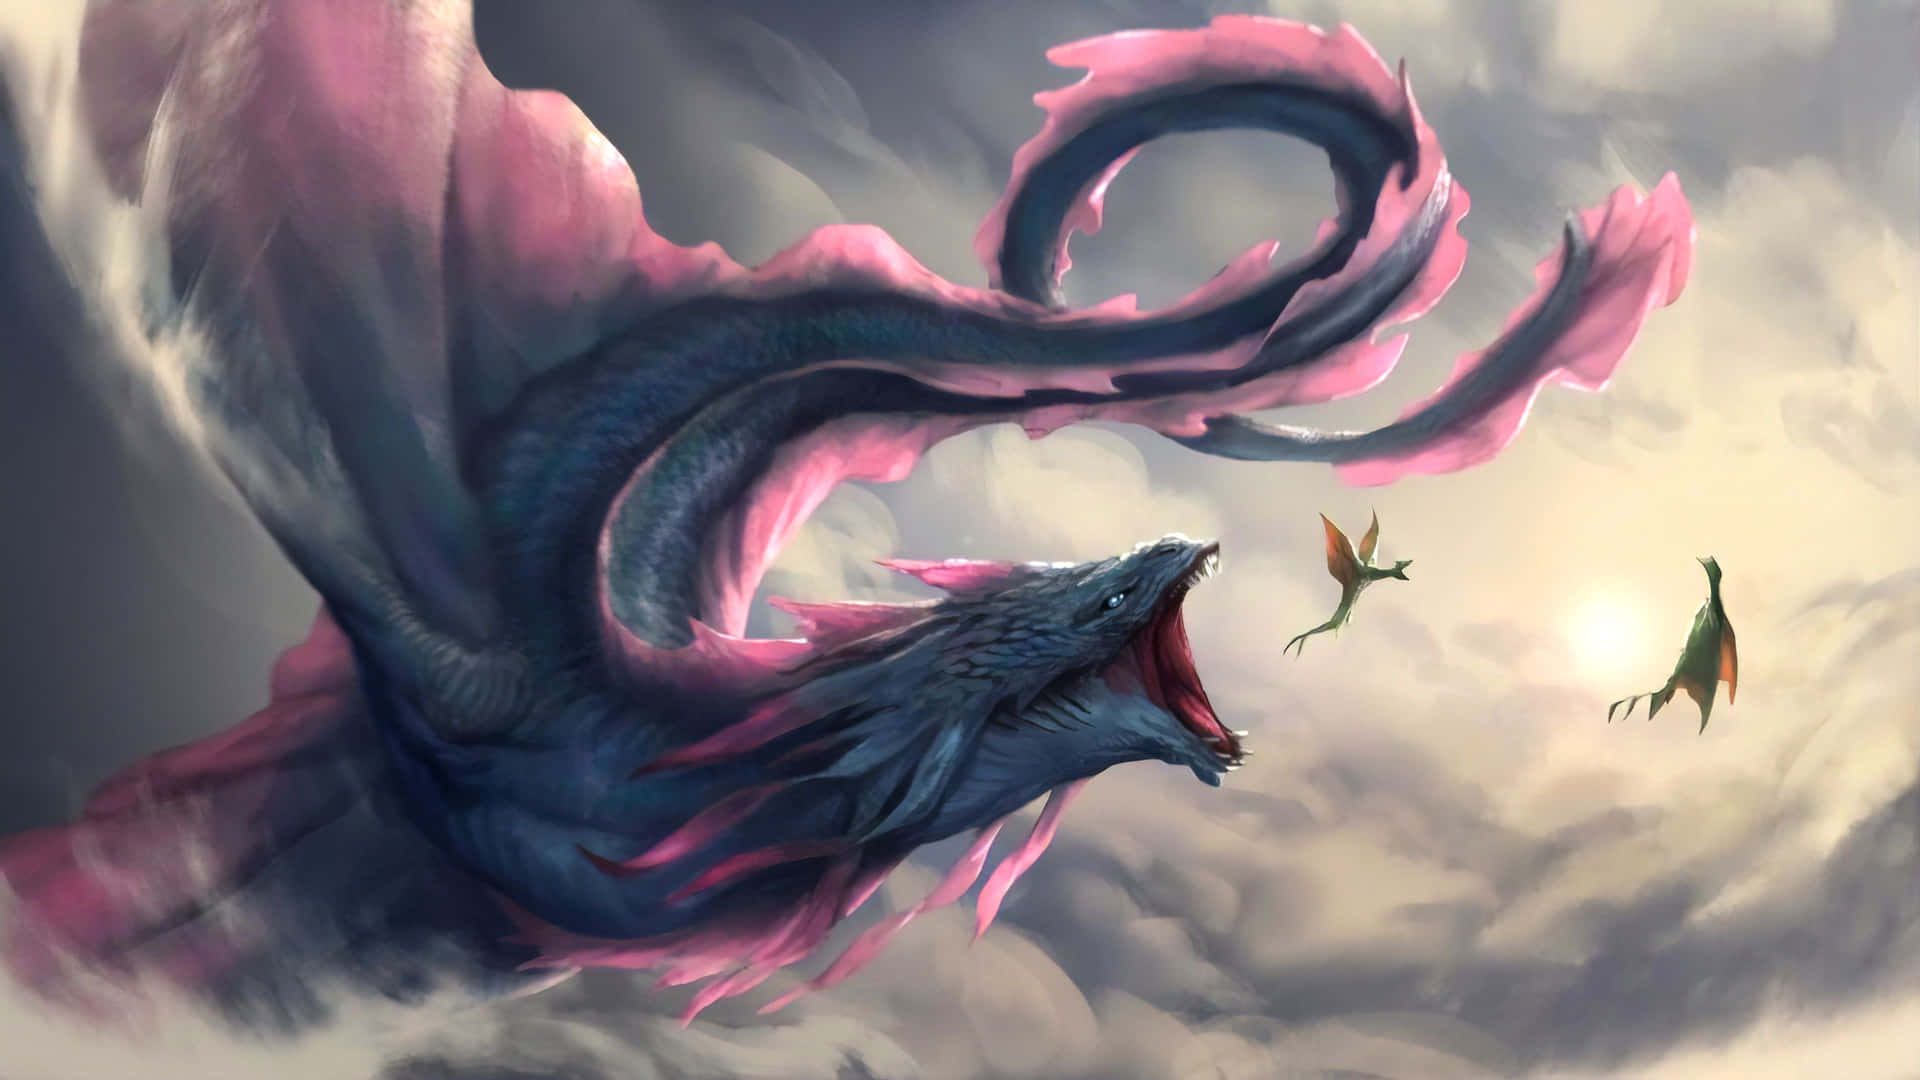 "The majestic dragon against a deep blue sky"